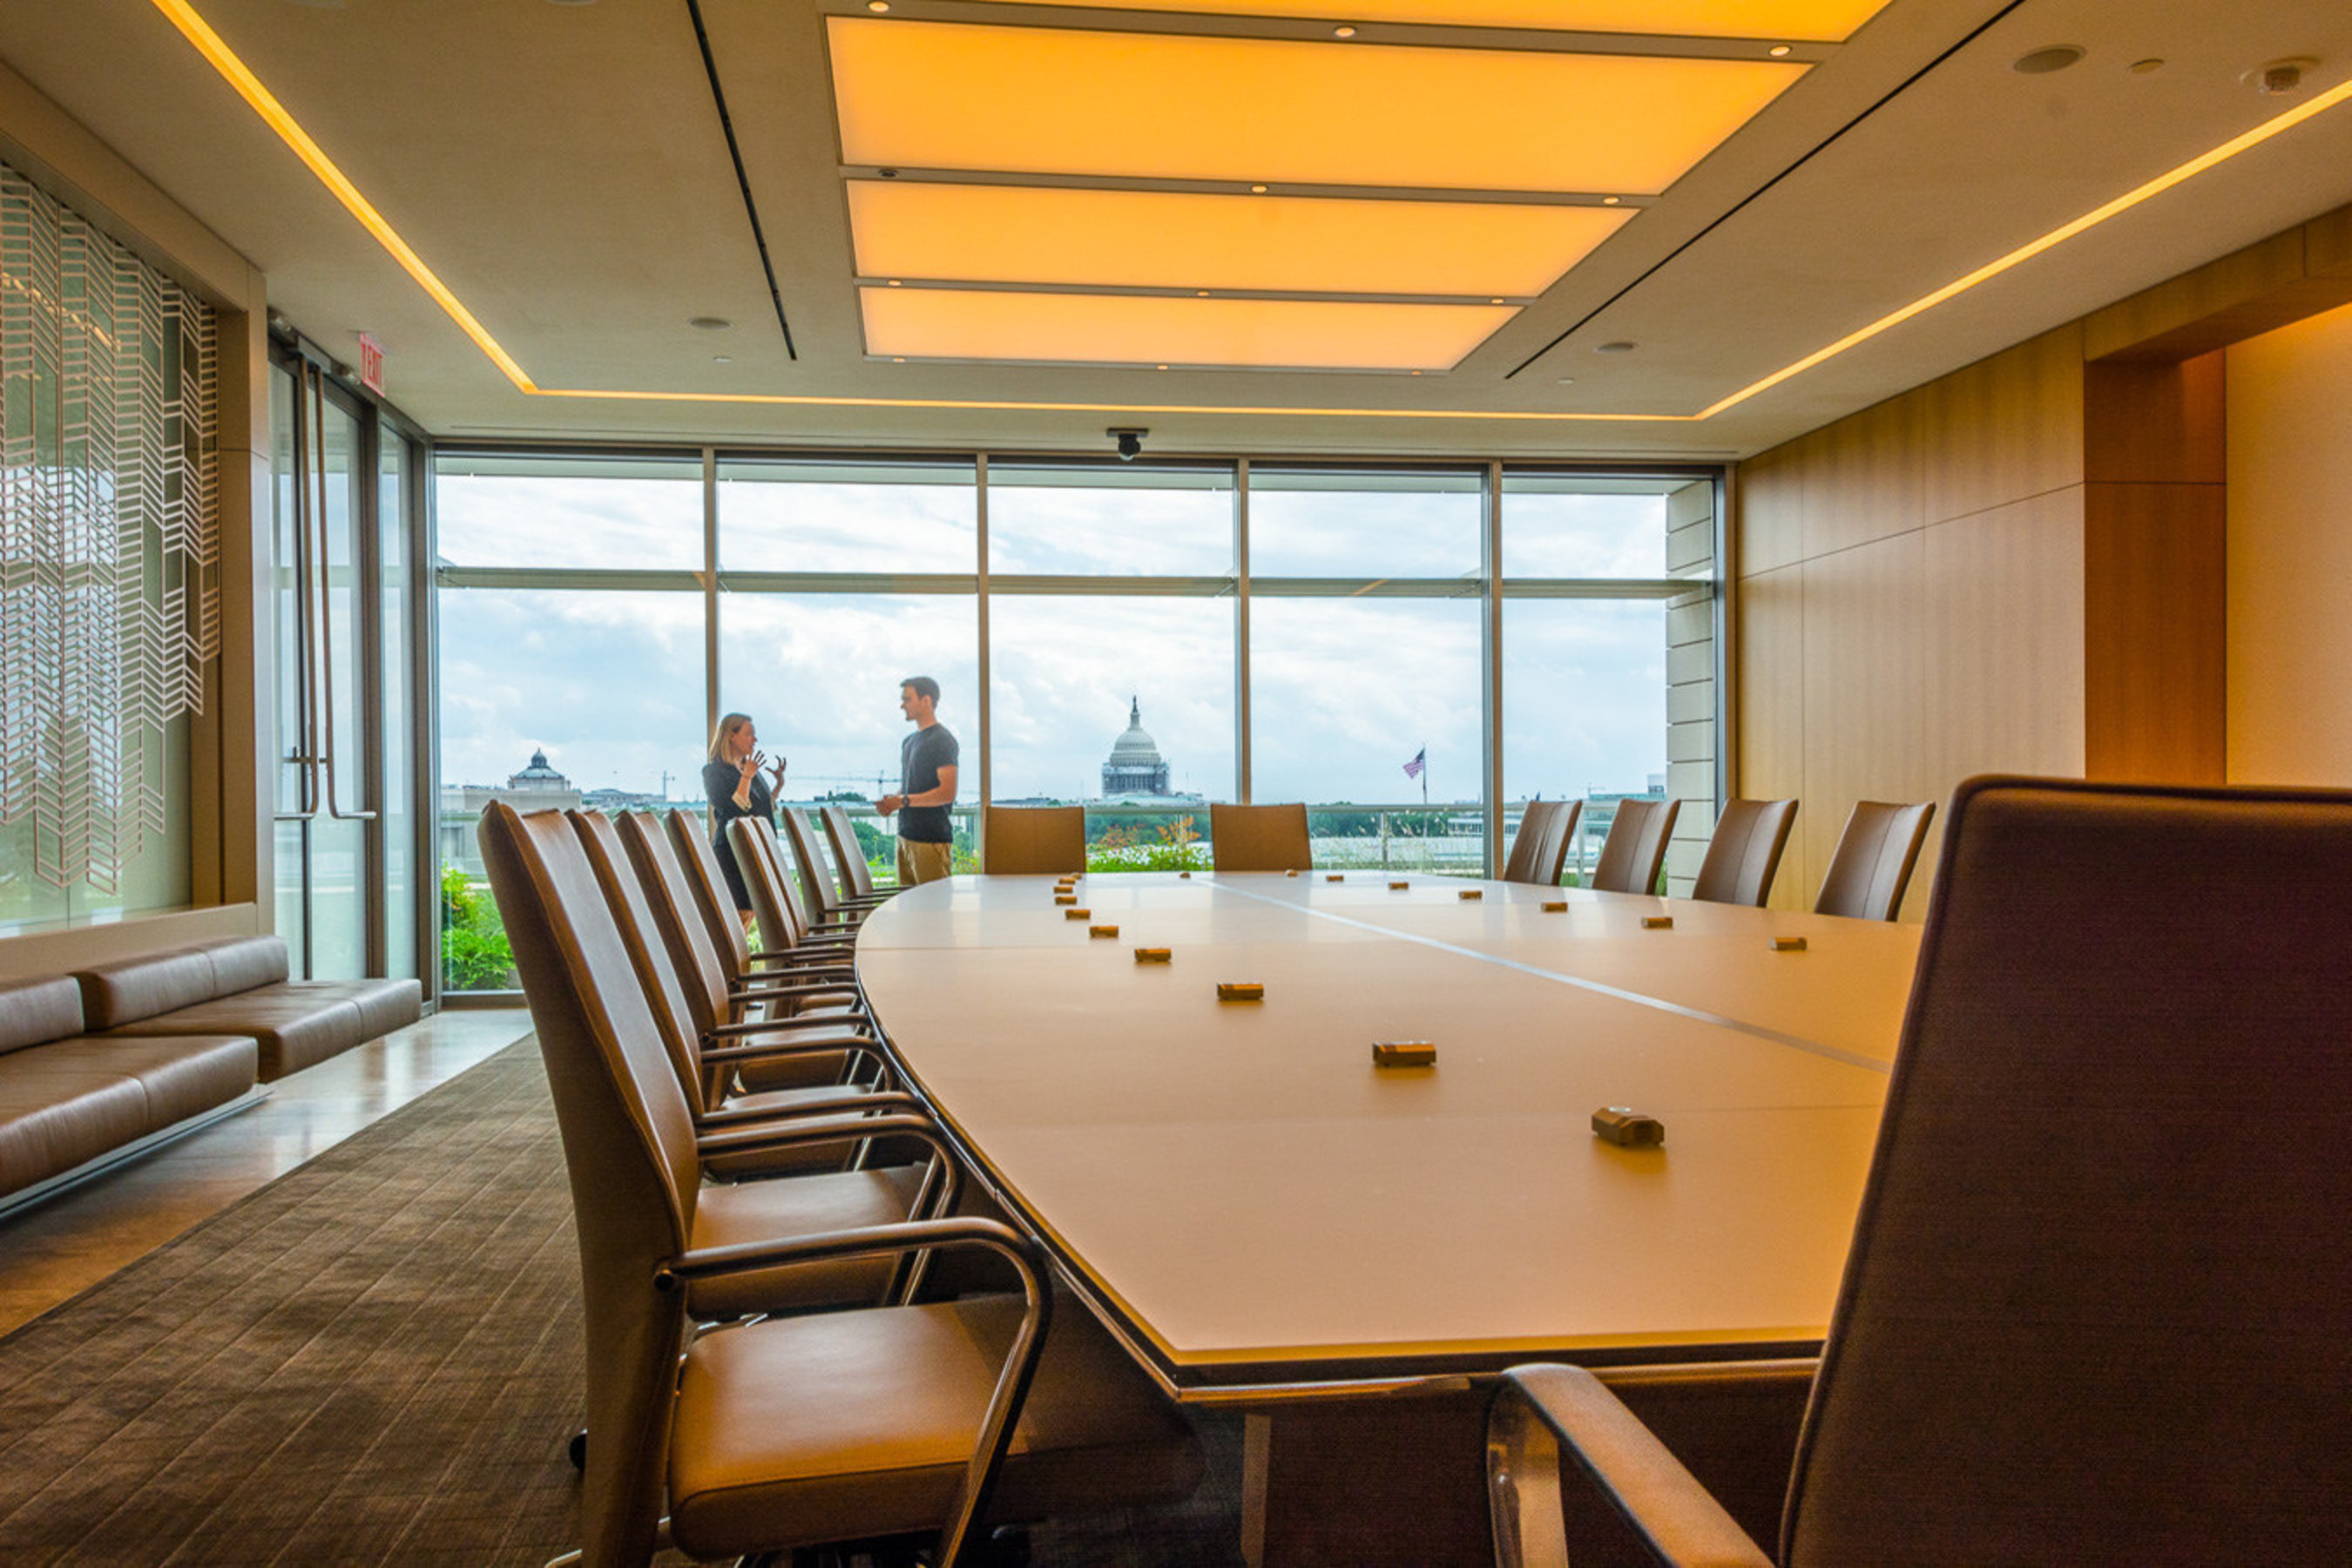 With panoramic views of the Capitol dome, the Washington Monument and the District's picturesque cityscape, Spire is now available to host corporate events atop 750 First Street, NE in the NoMa/Capitol Hill area of downtown Washington, DC.